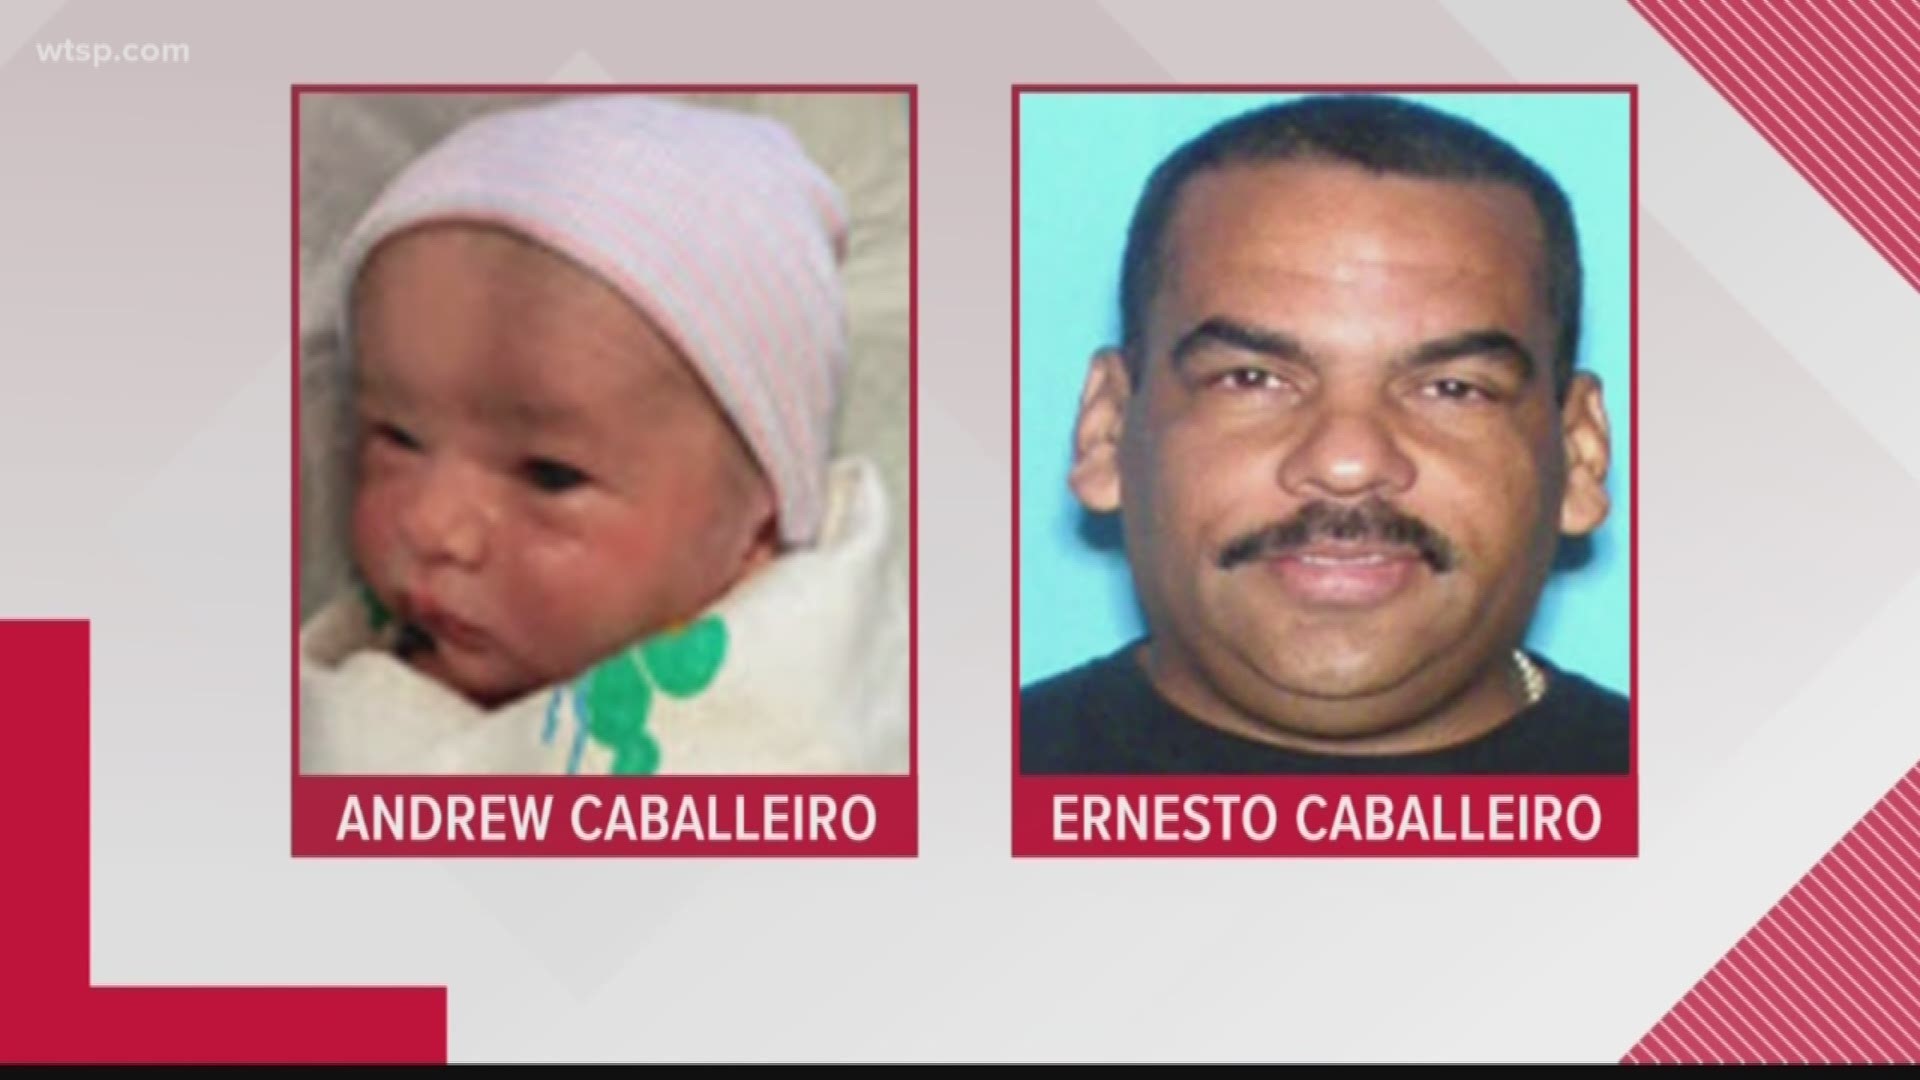 The baby is just a week old and was abducted from Miami by his father who died from a self-inflicted gunshot wound, according to investigators.